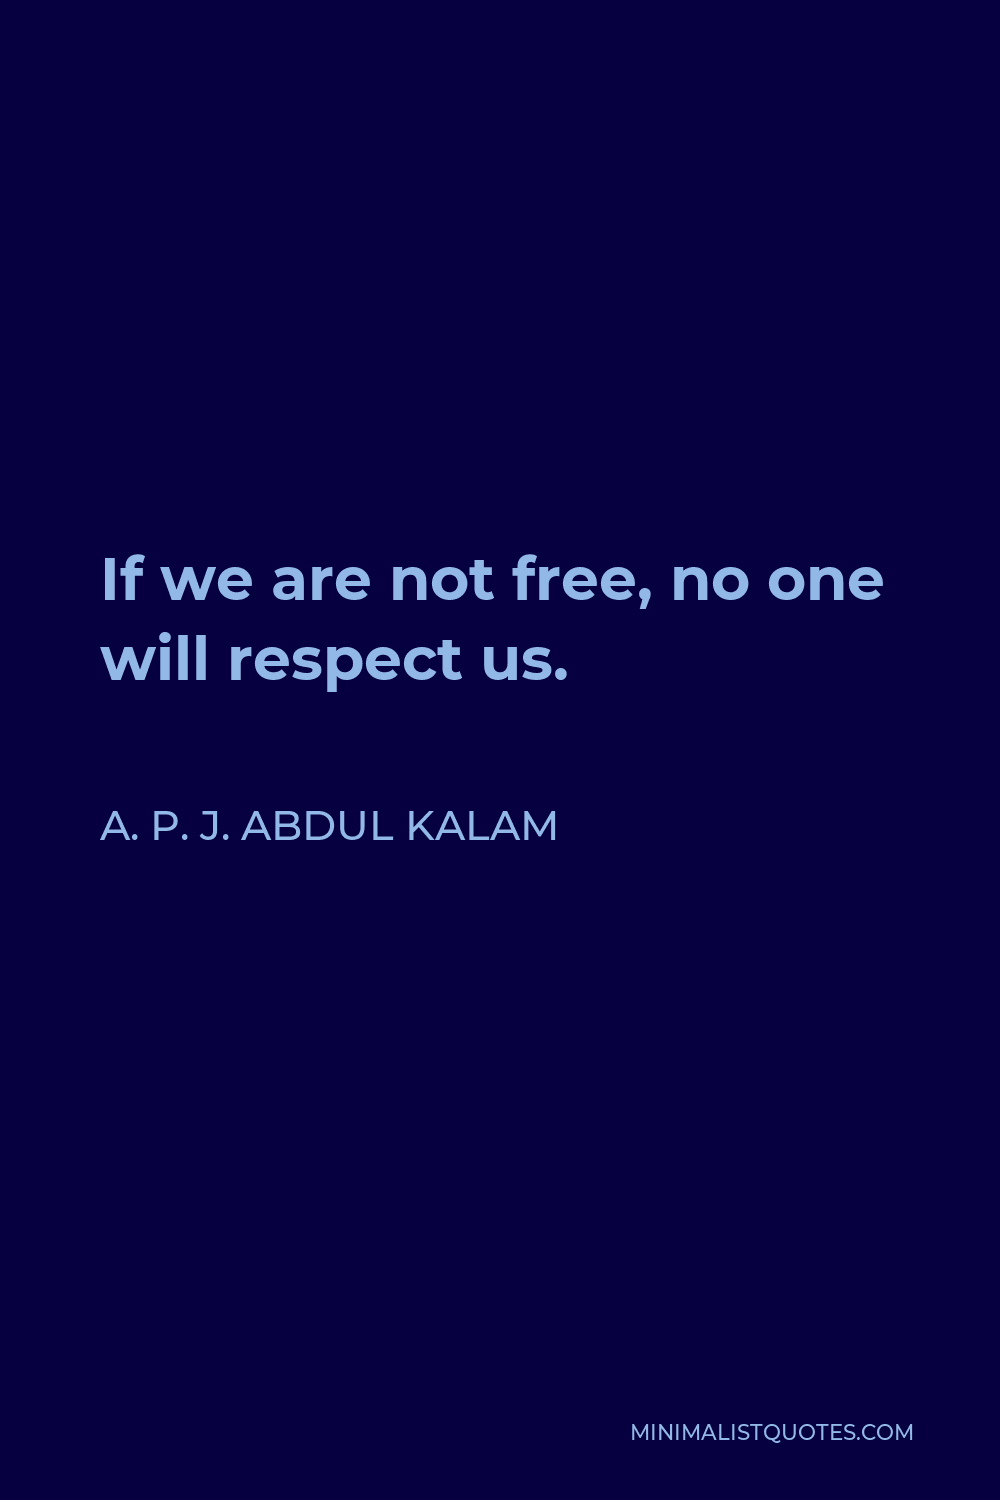 A. P. J. Abdul Kalam Quote - If we are not free, no one will respect us.